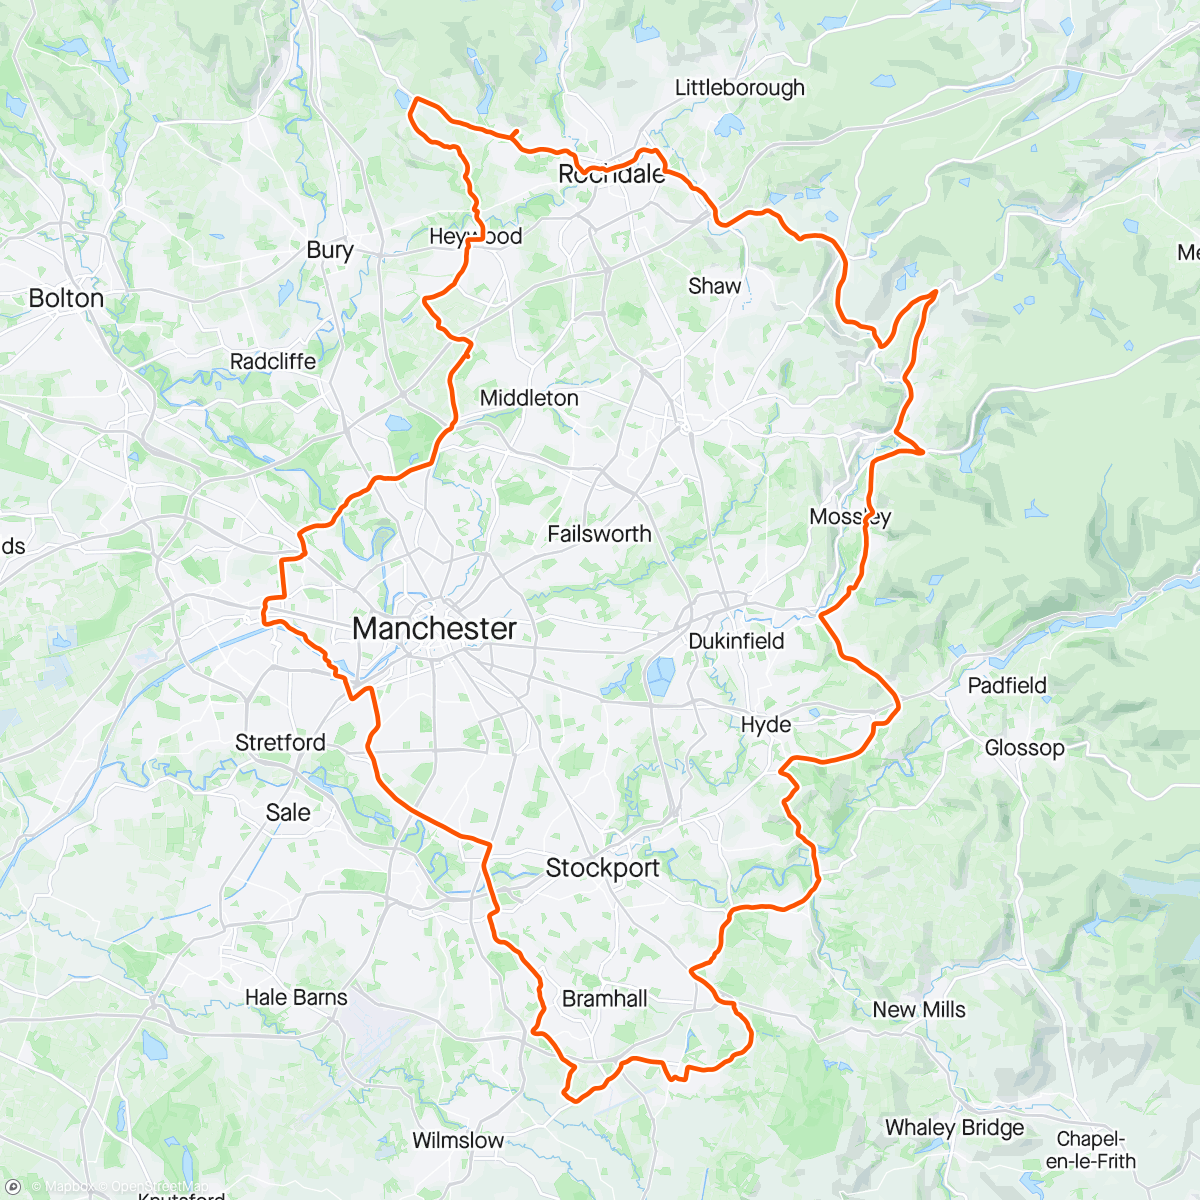 Mapa de la actividad, Tour de Manc. Best picnic ride, great pies, challenging route, with a brutal climb. Well sign posted, expensive but never had so many stops. Great pies at last one, otherwise would have ride through